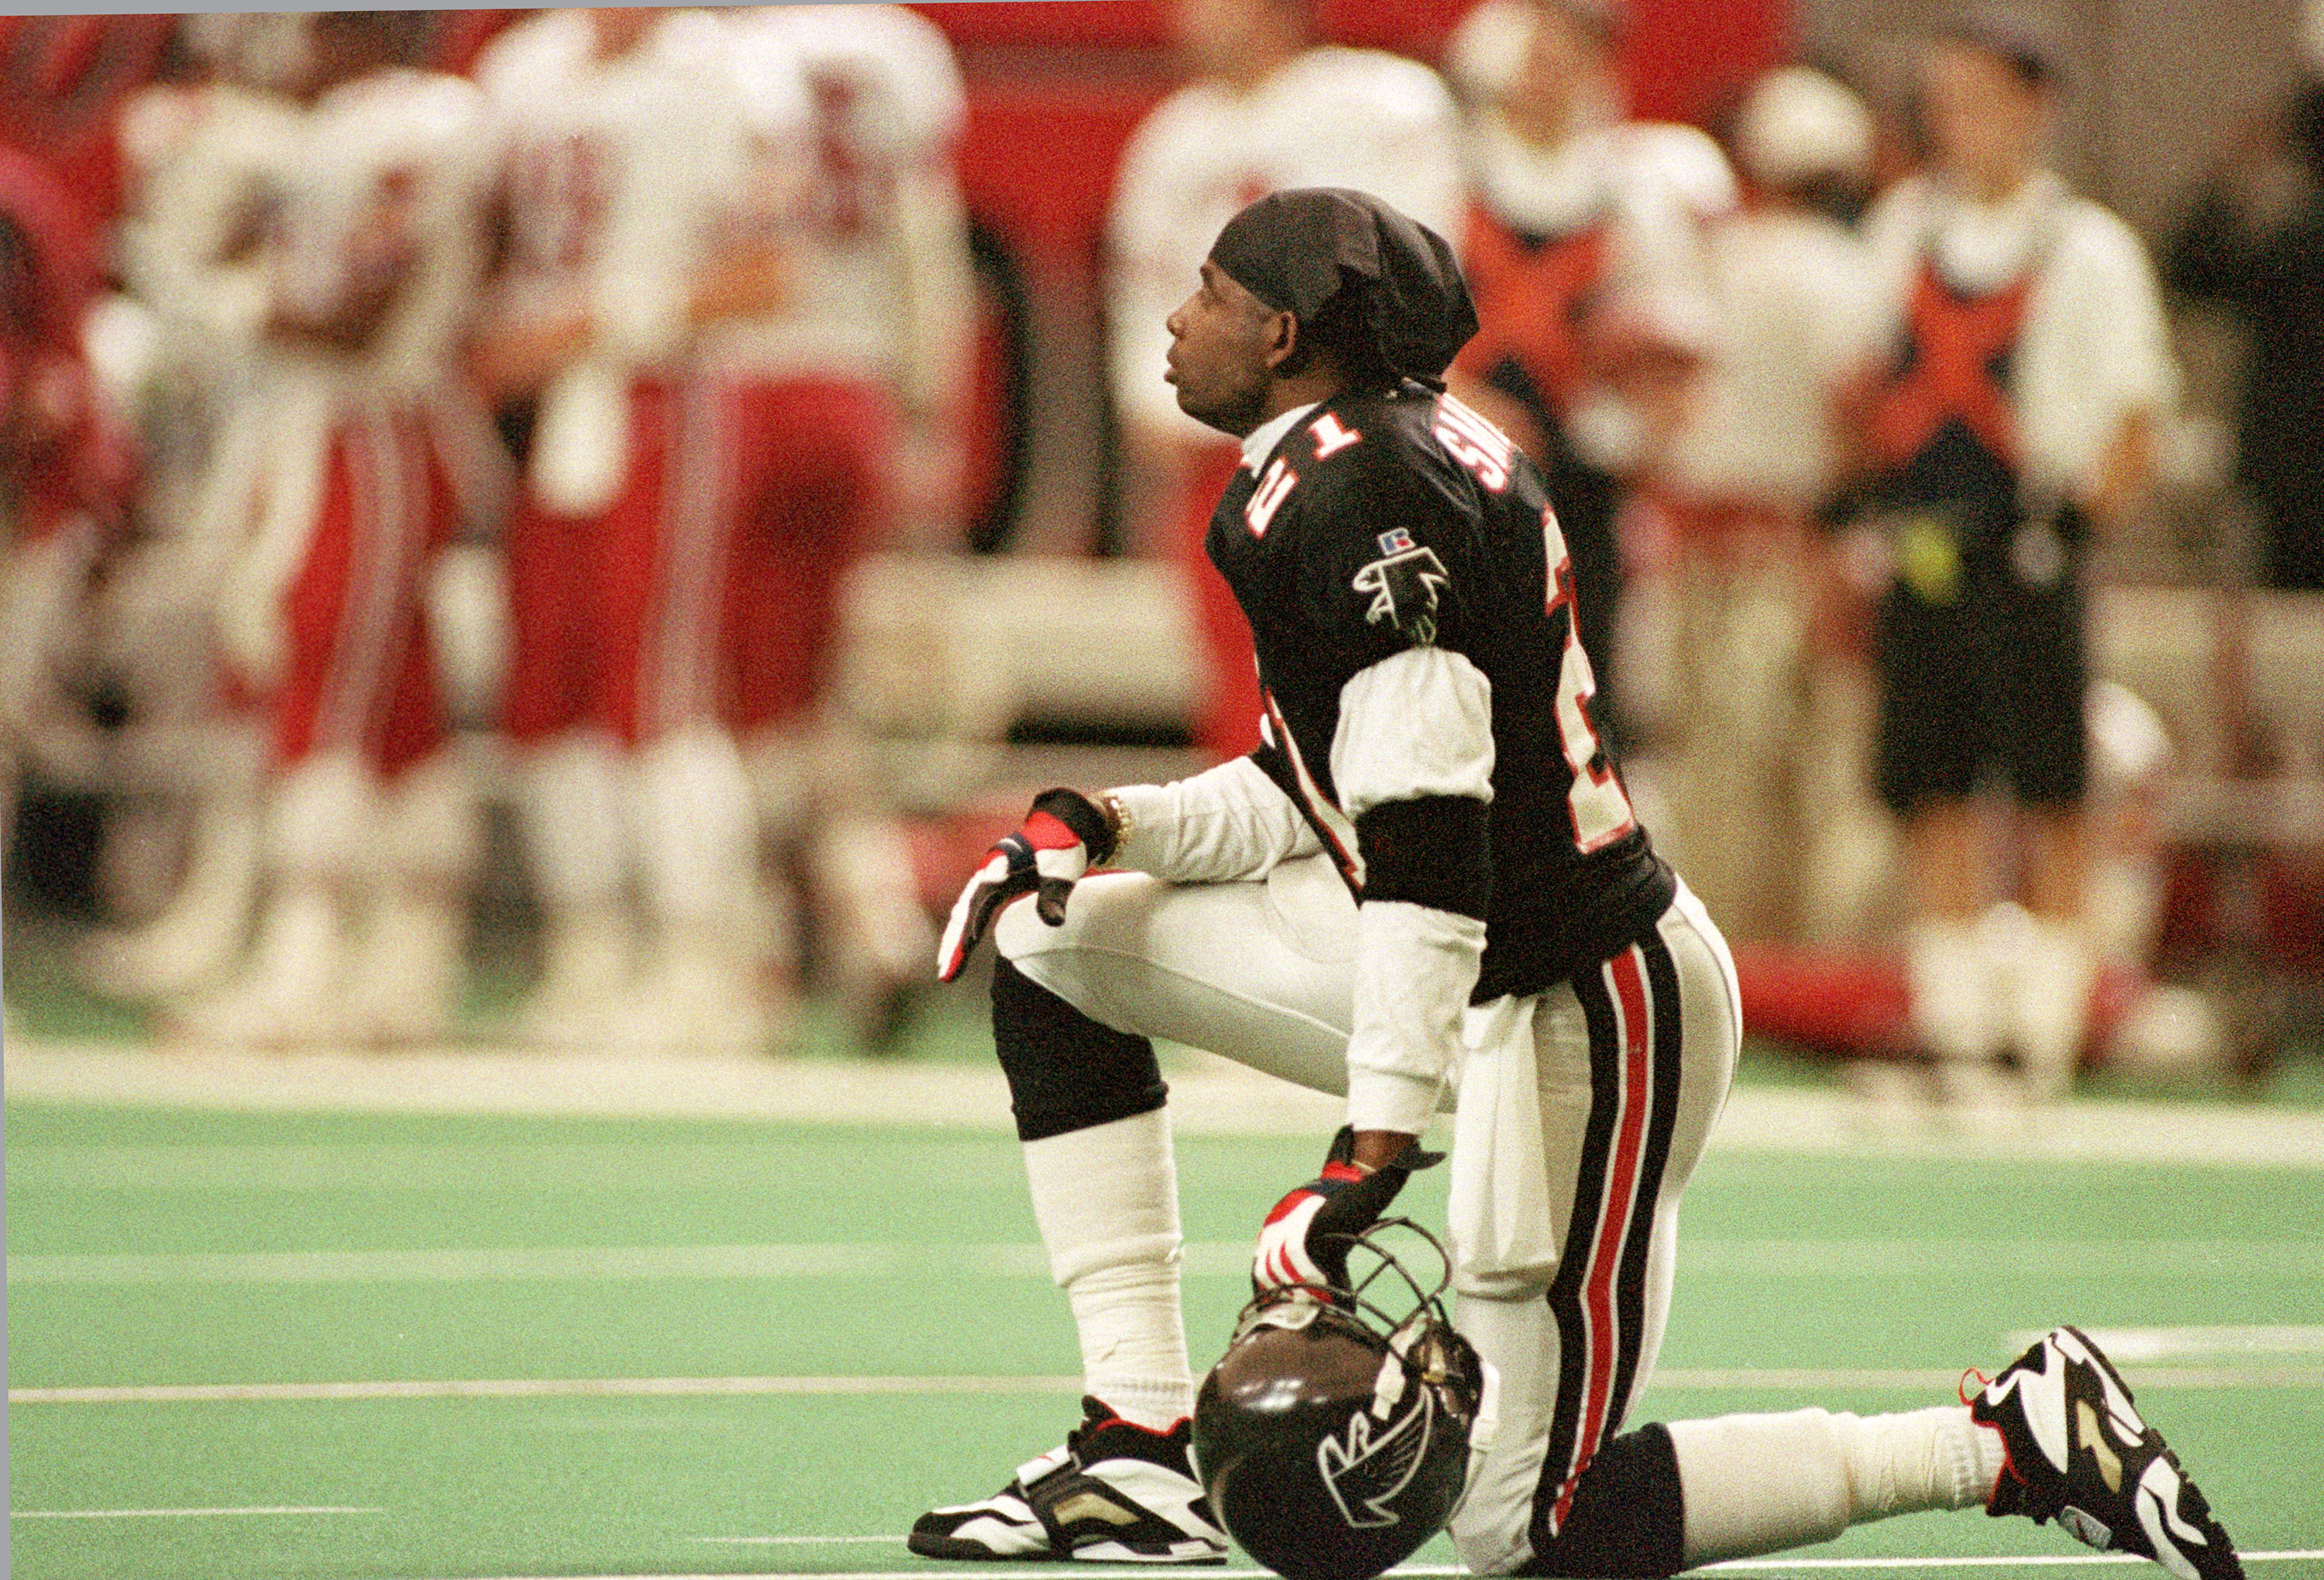 Atlanta Falcons cornerback Deion Sanders looks towards the stands from the field during a timeout against the Phoenix Cardinals in the Falcons' last game of the season at the Georgia Dome in Atlanta, Jan. 2, 1994.  (AP Photo/Ric Feld)